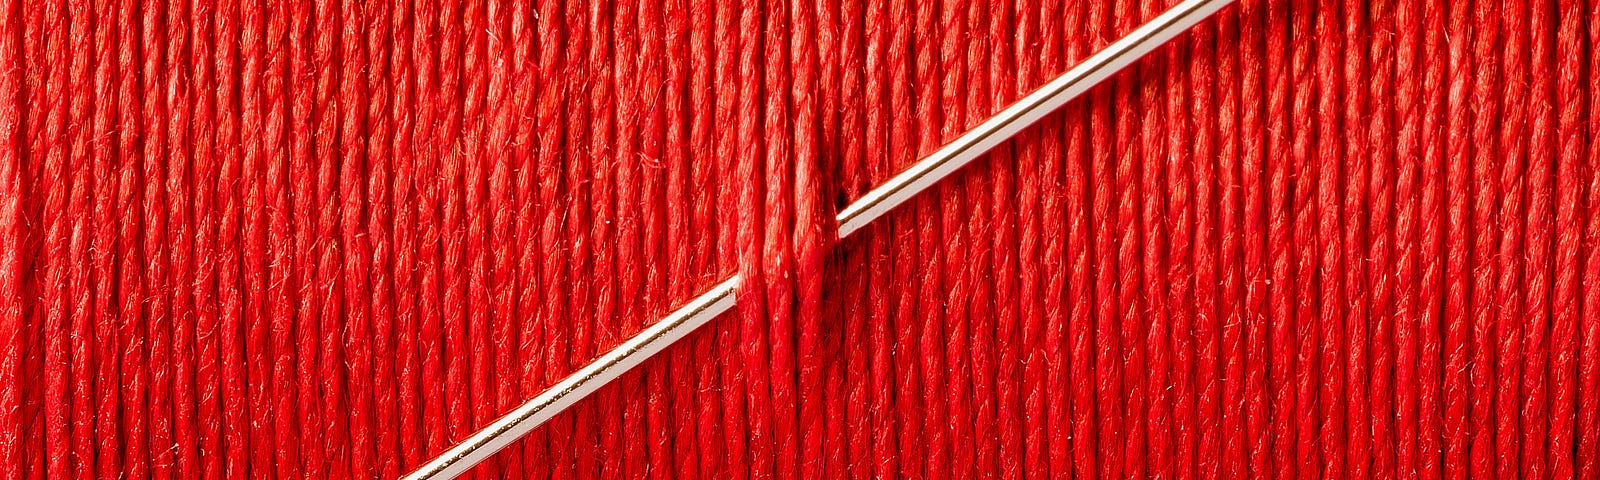 A needle stuck through a wall of red thread.